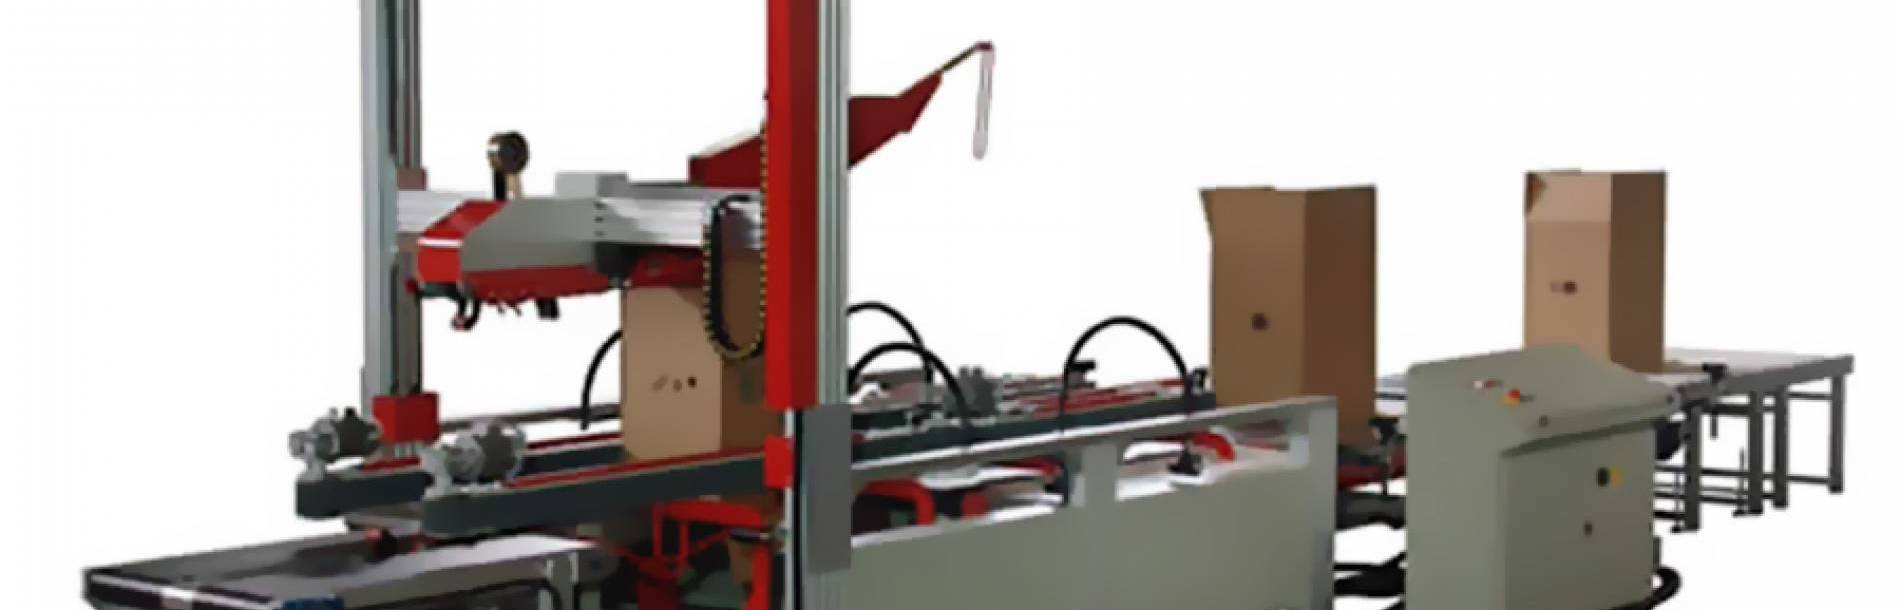 MASTERPACK - AUTOMATIC PACKAGING MACHINE (PATENTED BY US)